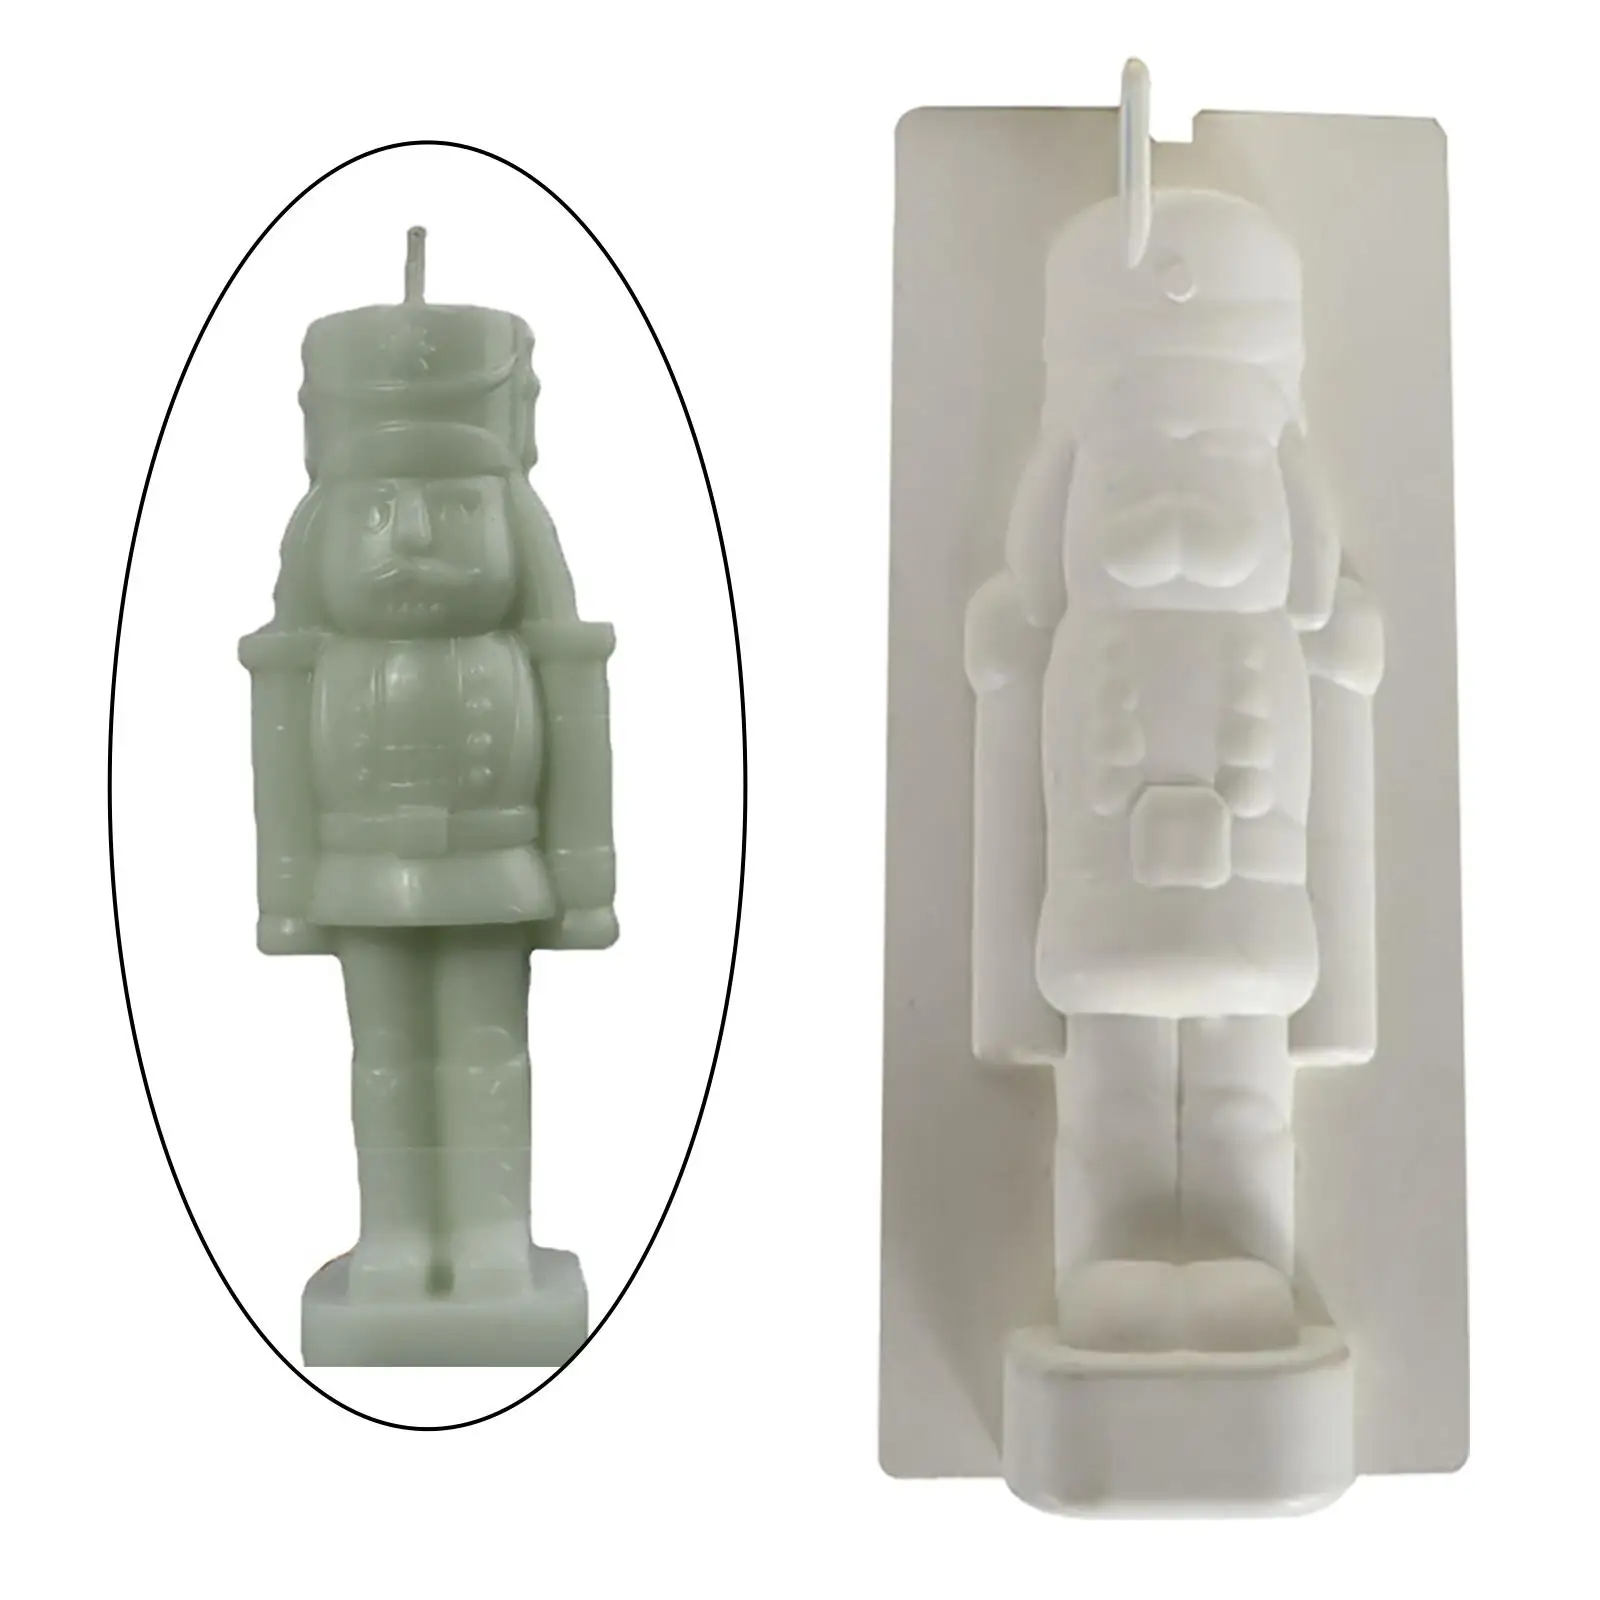 Nutcracker Candle Mould, Handmade Soap Aromatherapy Candles Making, Wax Lotion Bar Silicone Mold Craft Resin Moulds Handcraft